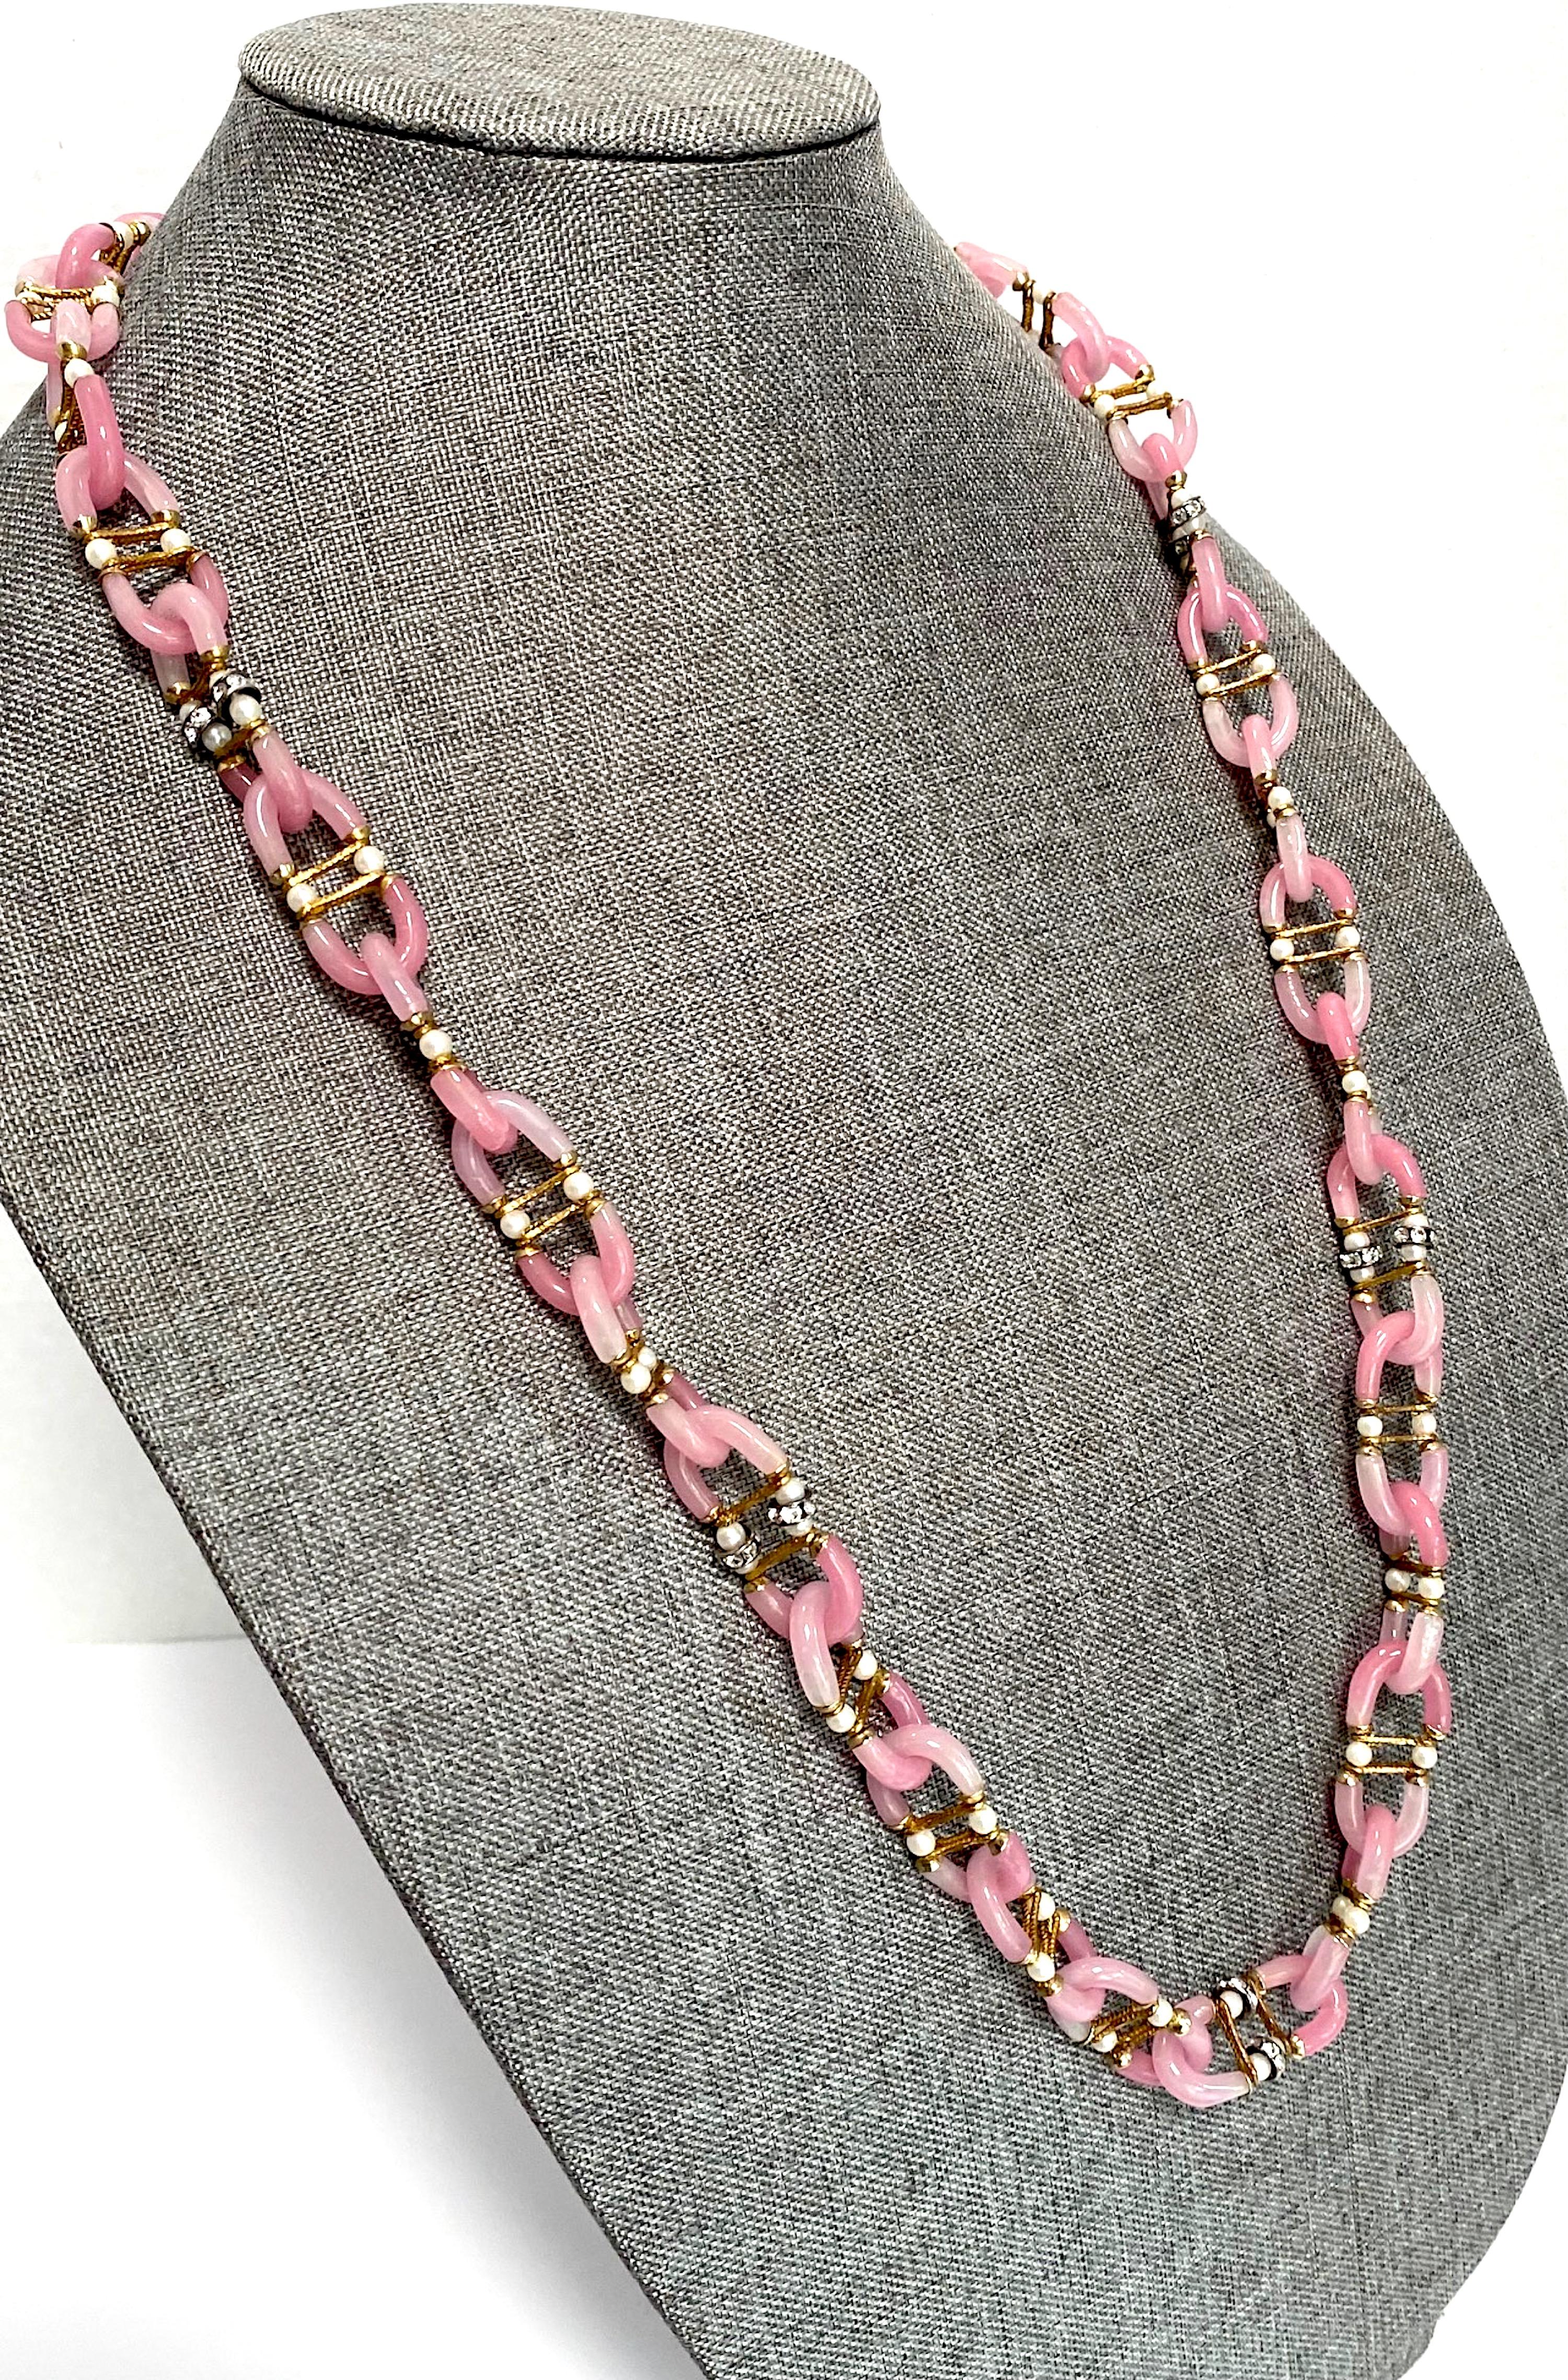 Archimede Seguso, Vetri d'Arte, for Chanel Rose Pink Glass Chain Necklace, 1960s 2